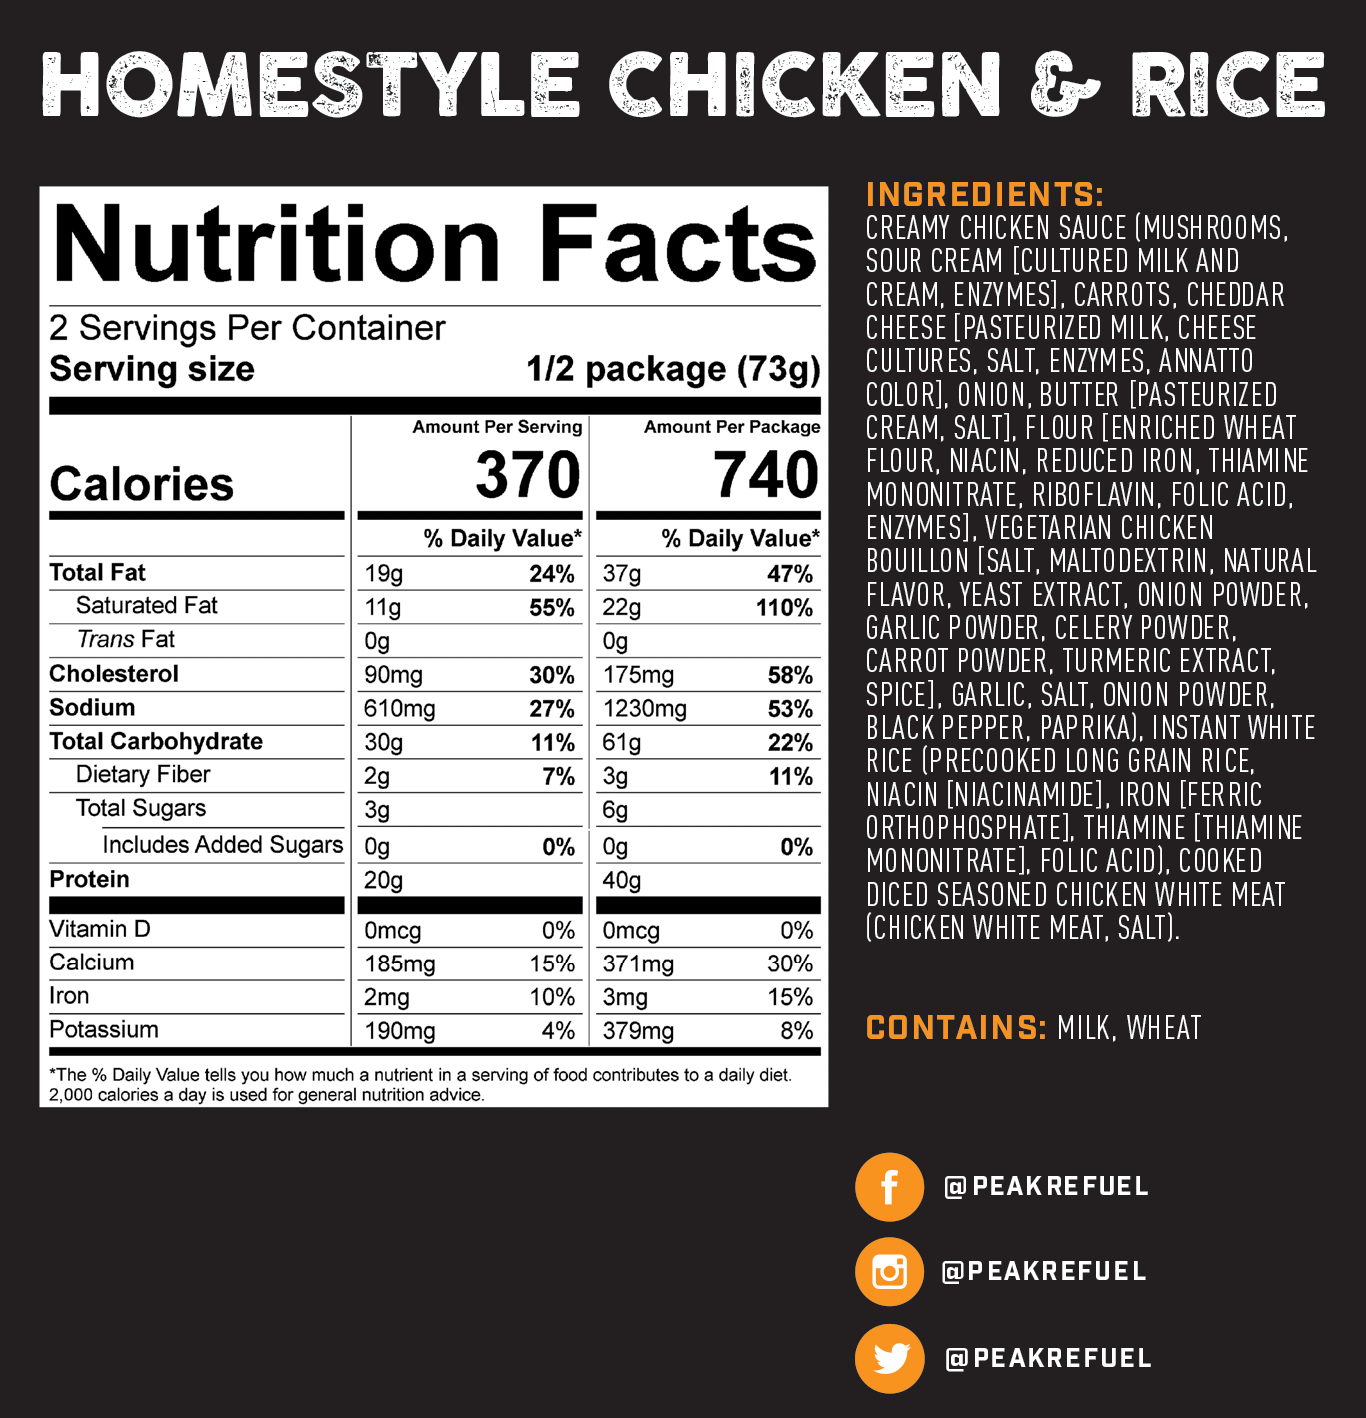 A nutrition facts label with black text and a logo of a camera in a circle.